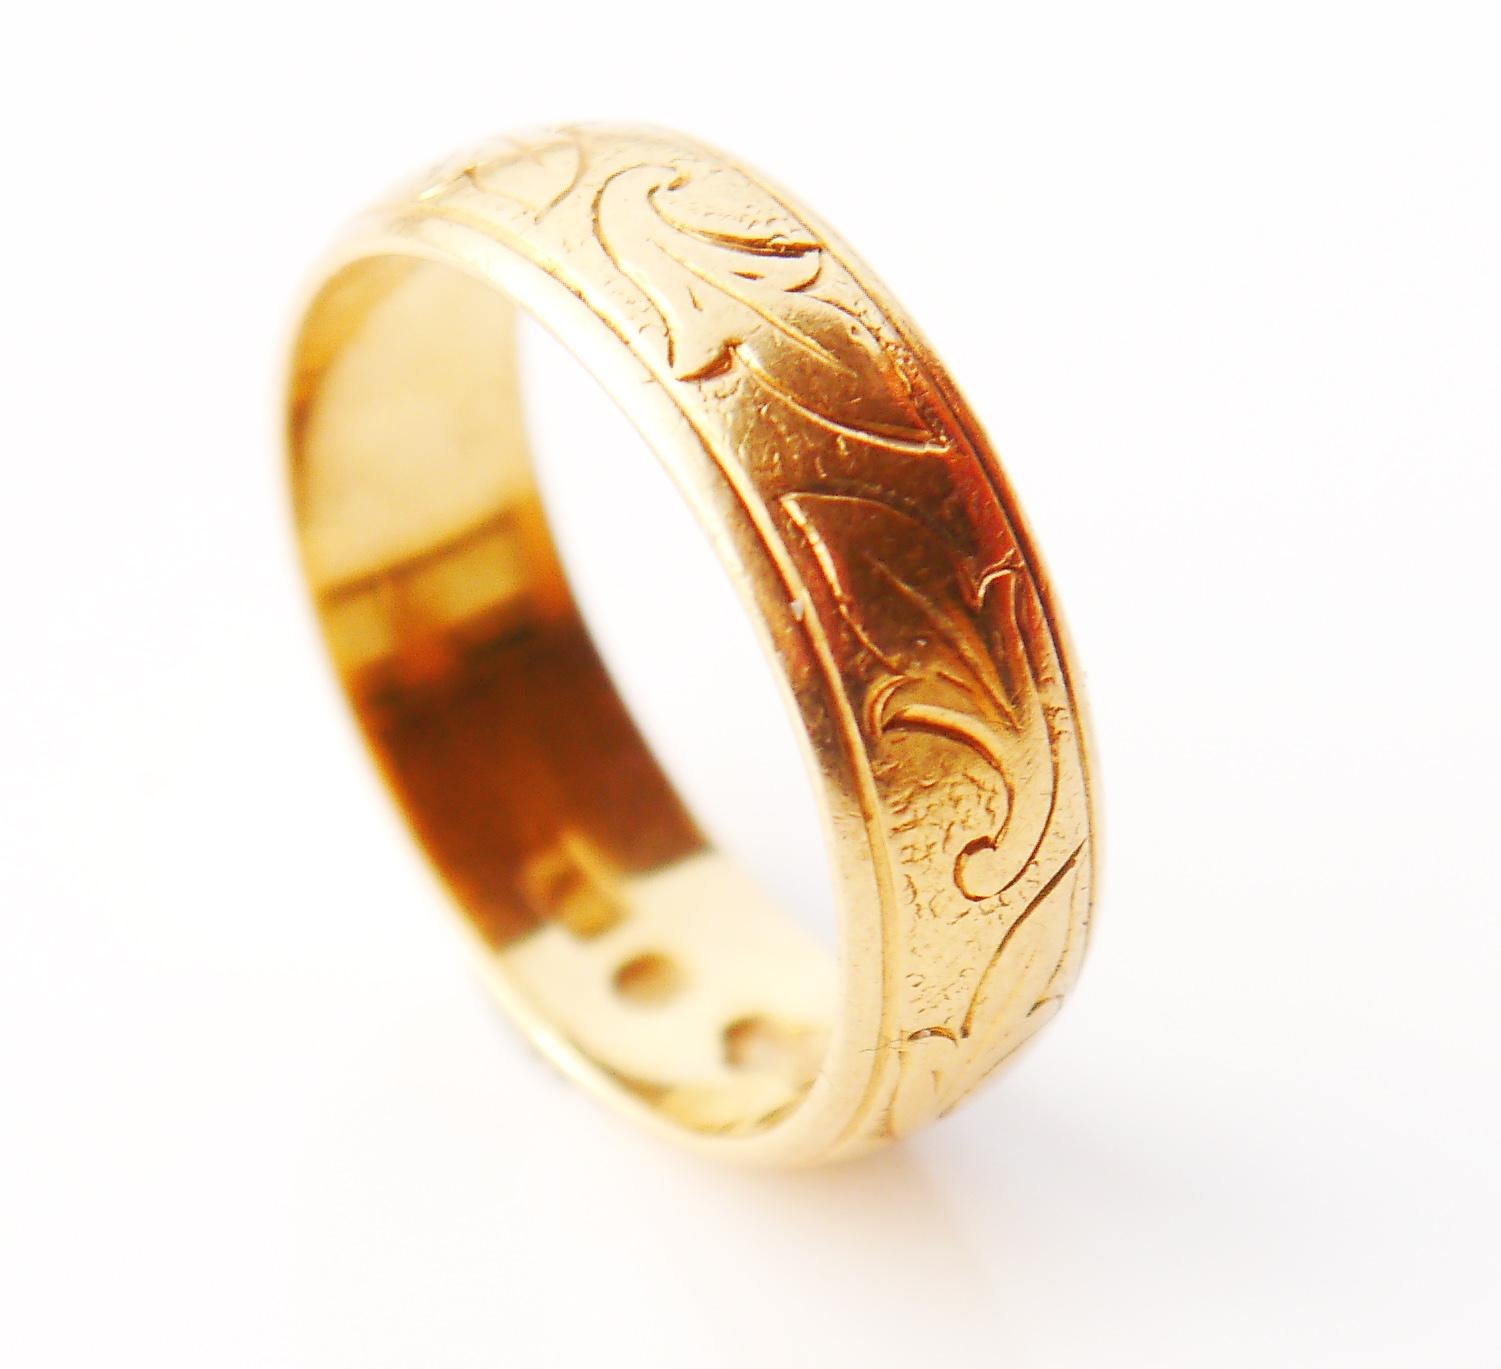  Old ring in solid 20K Yellow Gold. Hand - engraved contentious floral ornament on the band. Unisex type, if that's your size...
Made in Sweden. Hallmarked 20K. Unknown workshop ,city of Linköping. Year mark: Z6 / made in 1902.

The band  is 5.7 mm